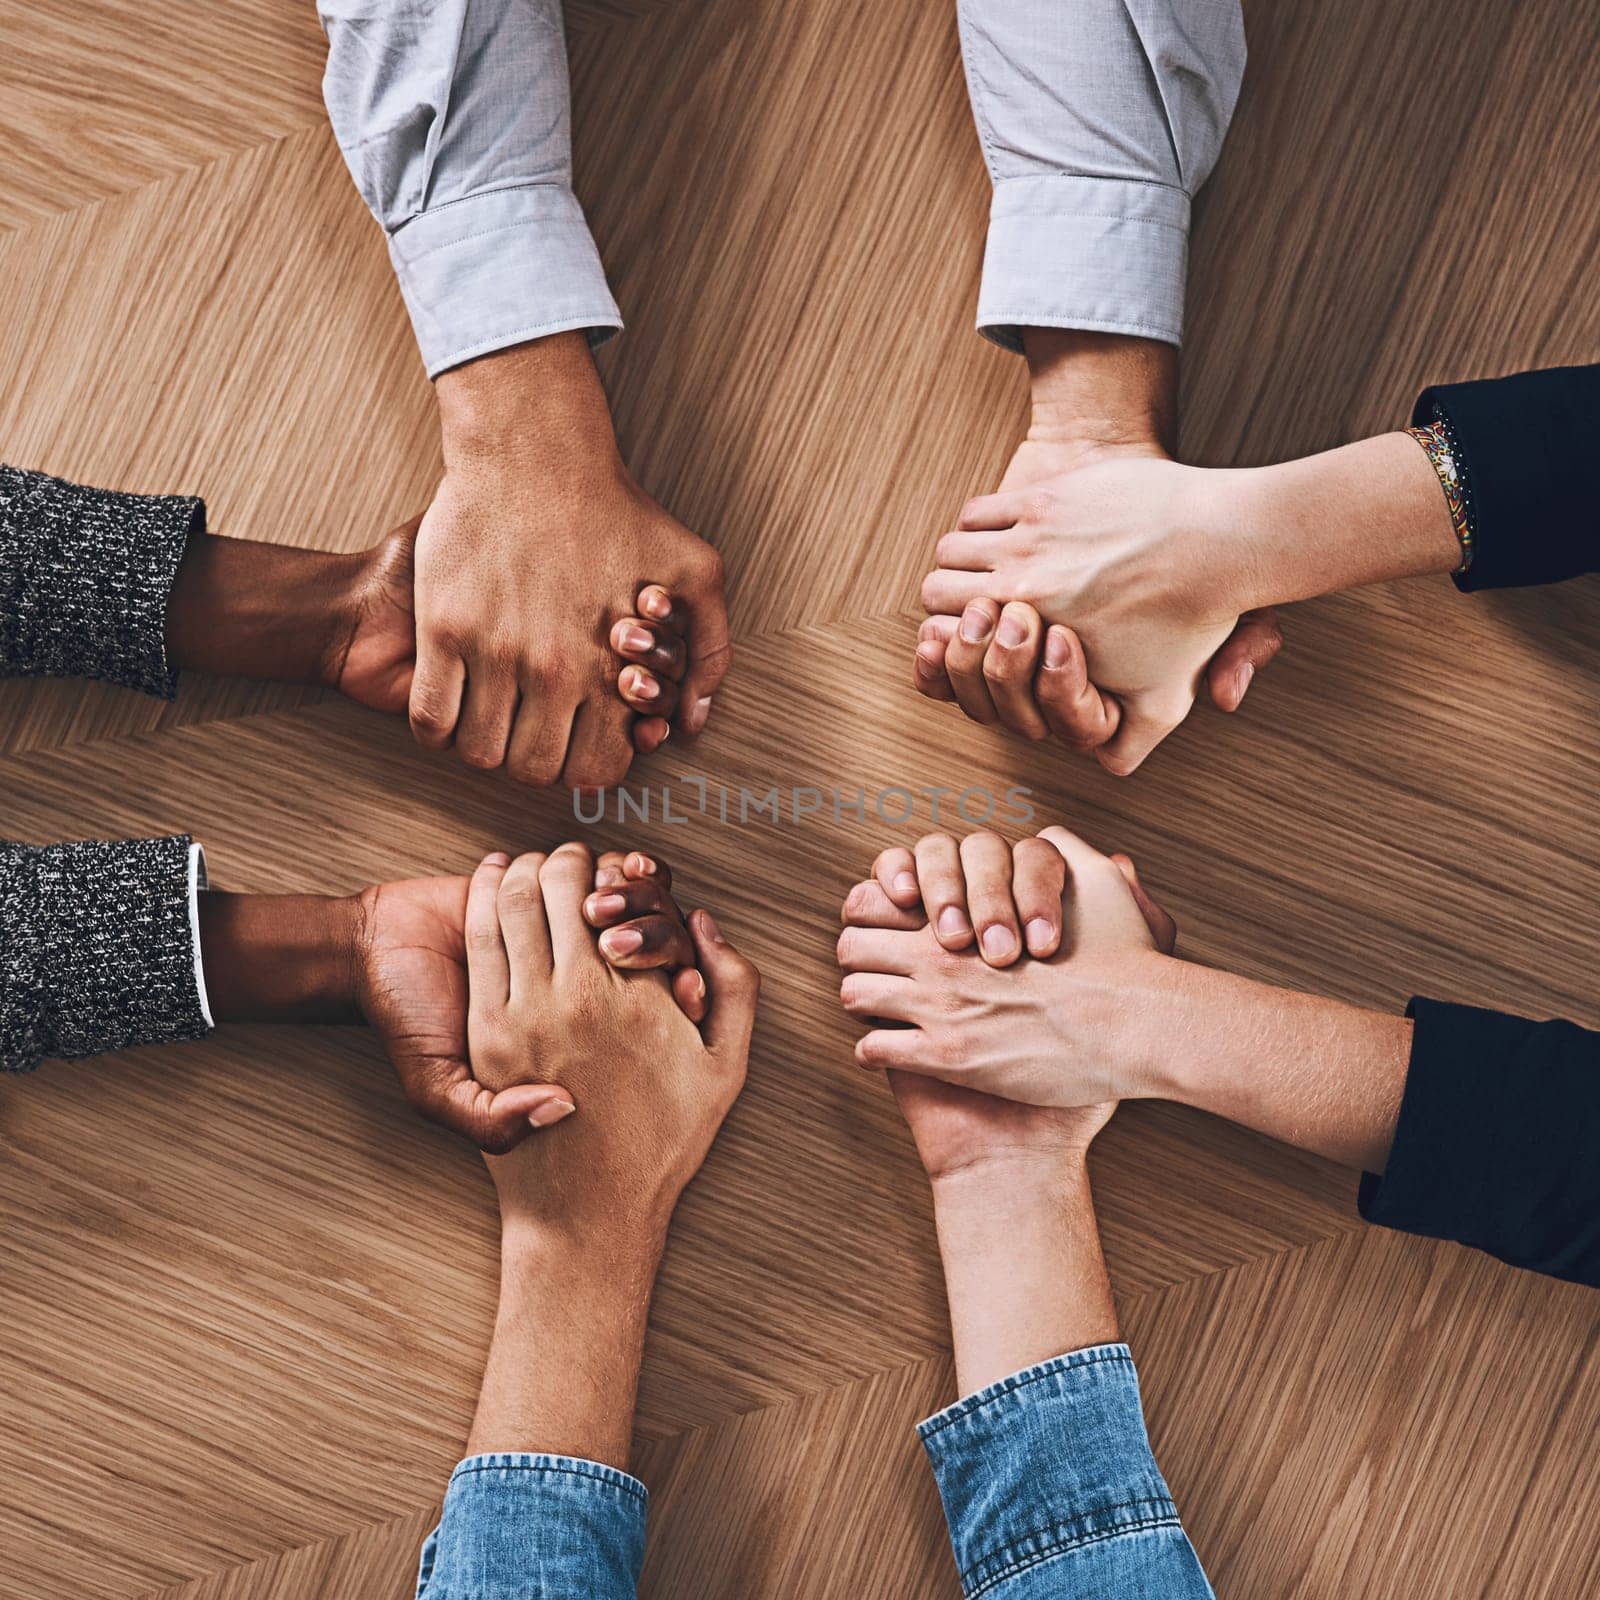 Above, partnership or business people holding hands for support, teamwork or strategy in office. Motivation, zoom or employees in group collaboration with diversity or mission for goals together.